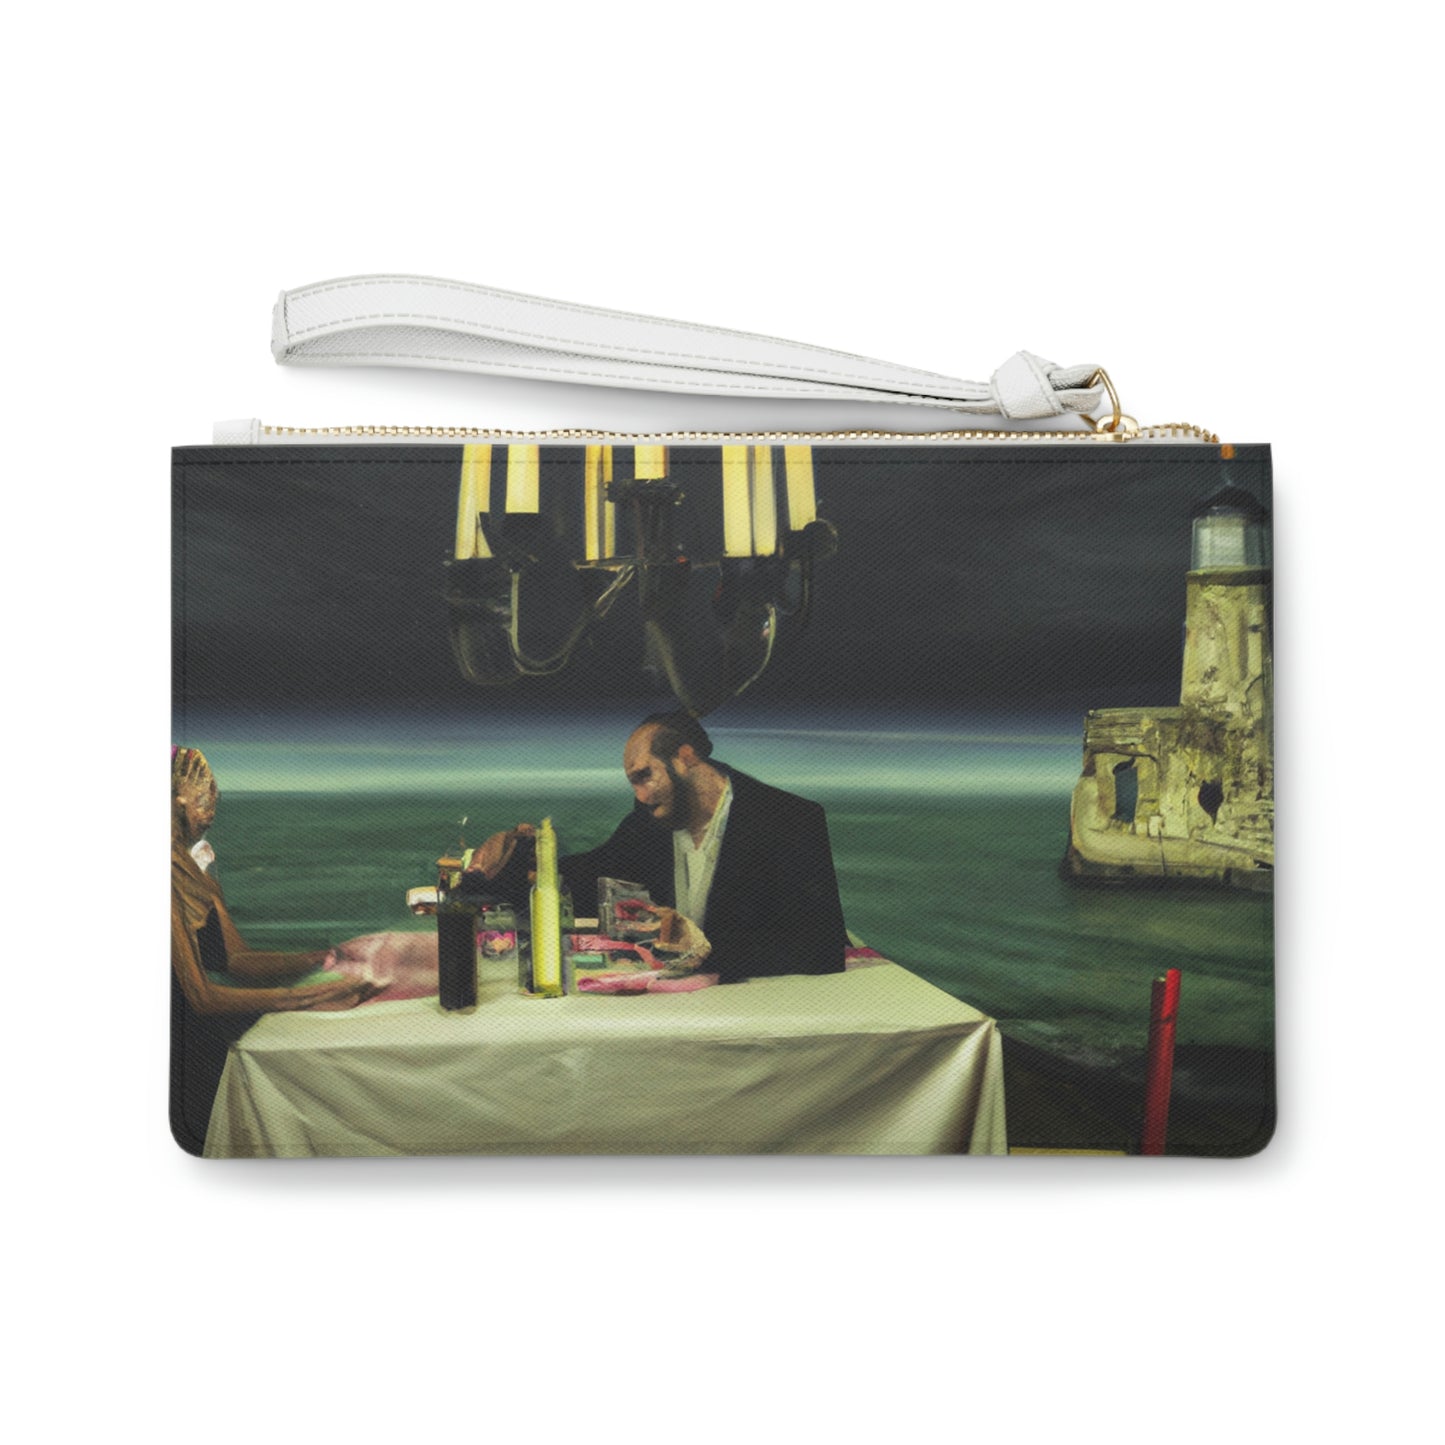 "A Beacon of Romance: An Intimate Candlelit Dinner in a Forgotten Lighthouse" - The Alien Clutch Bag